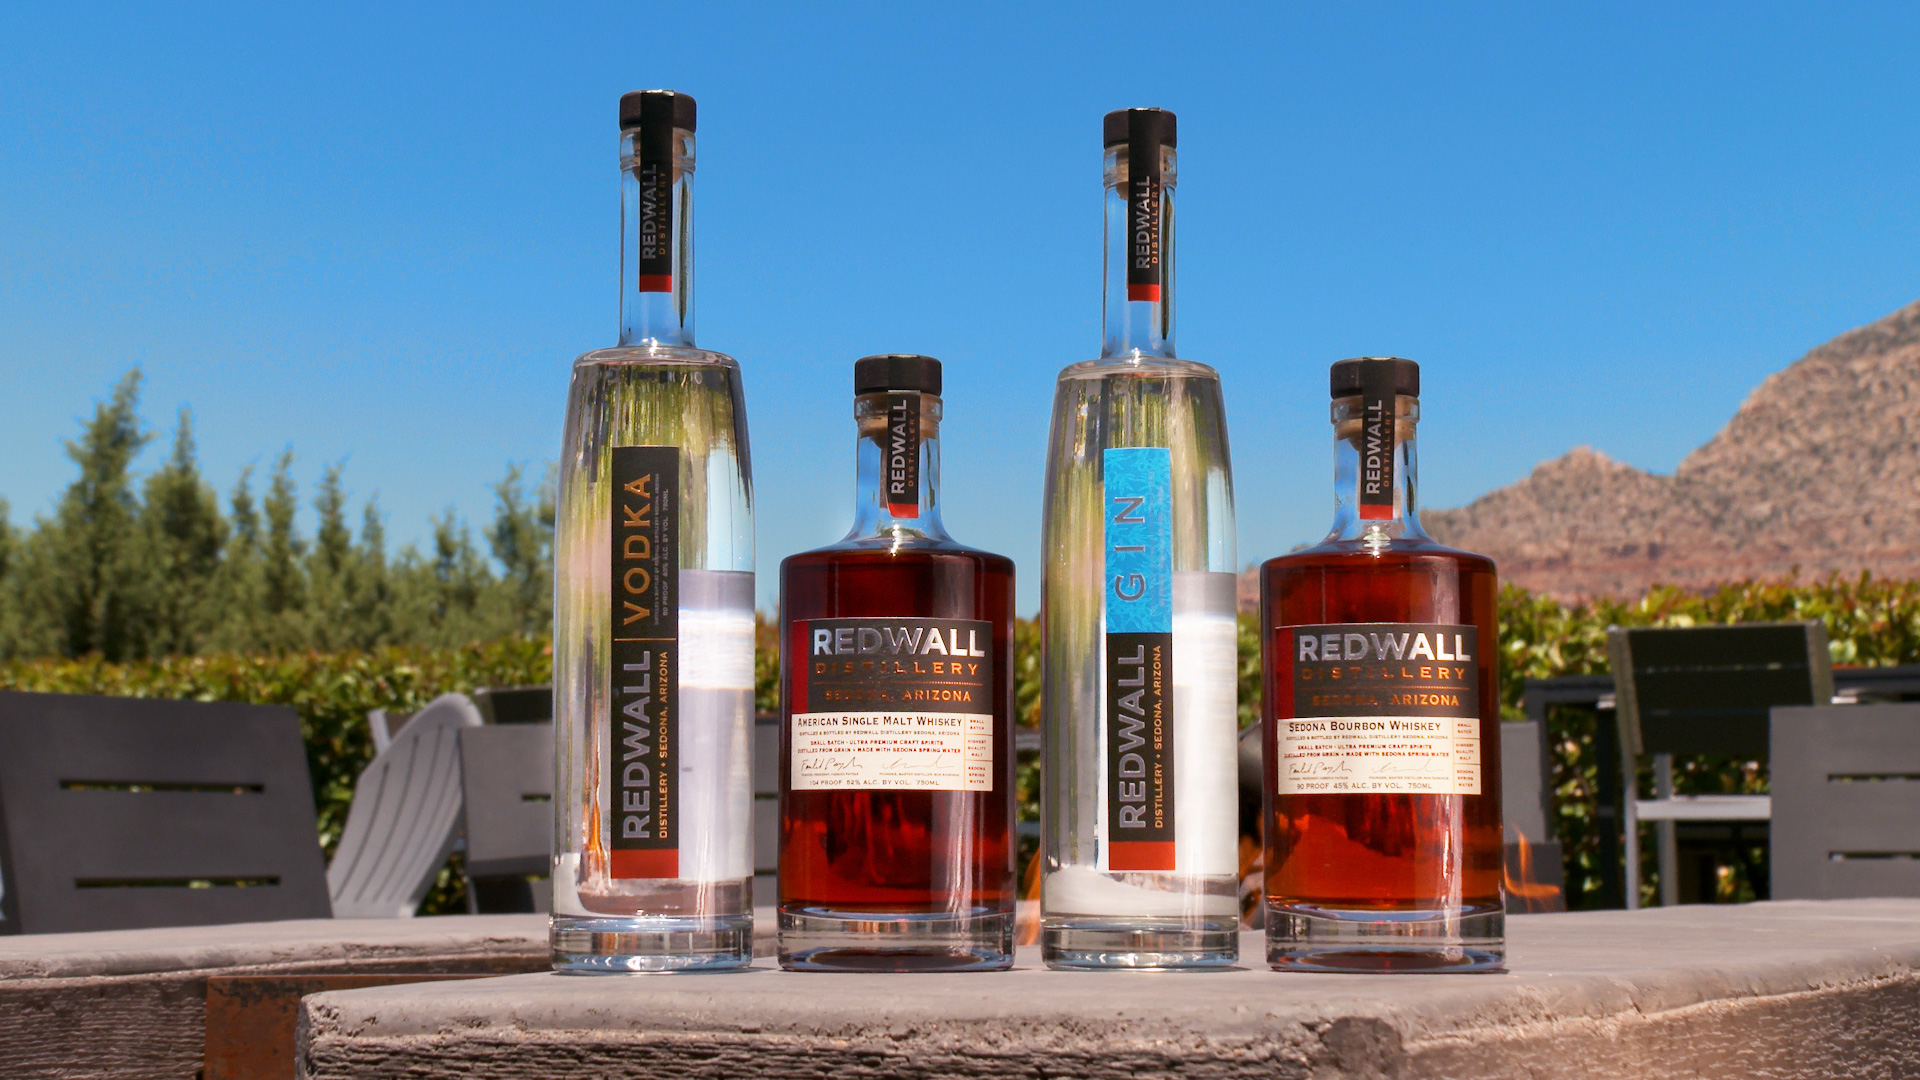 Bottles of Redwall Distillery products in Sedona, Arizona